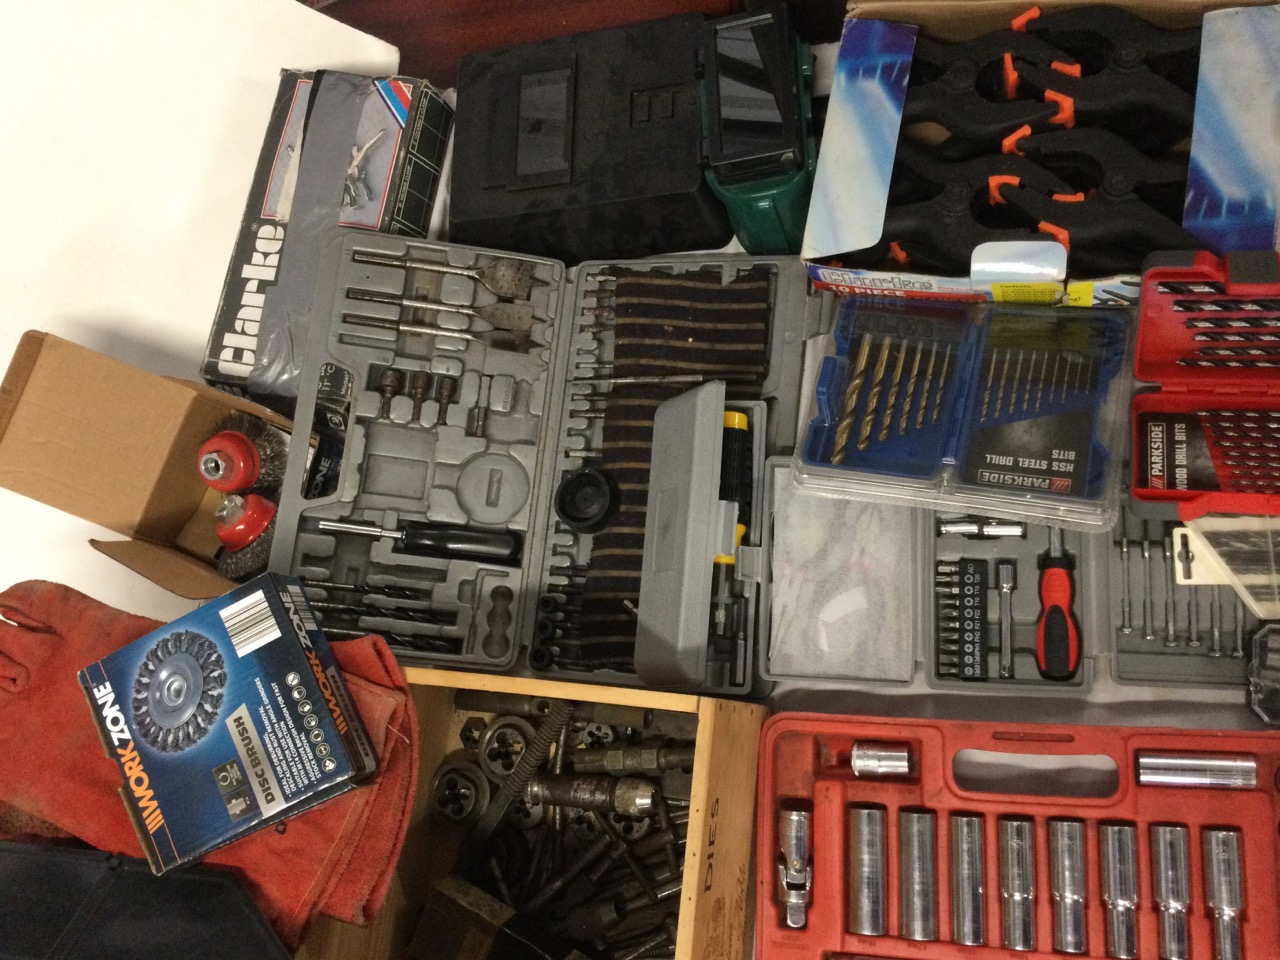 Miscellaneous cased socket sets, sets of spanners, clamps, cased drill bits, files, welding gear, - Image 3 of 3